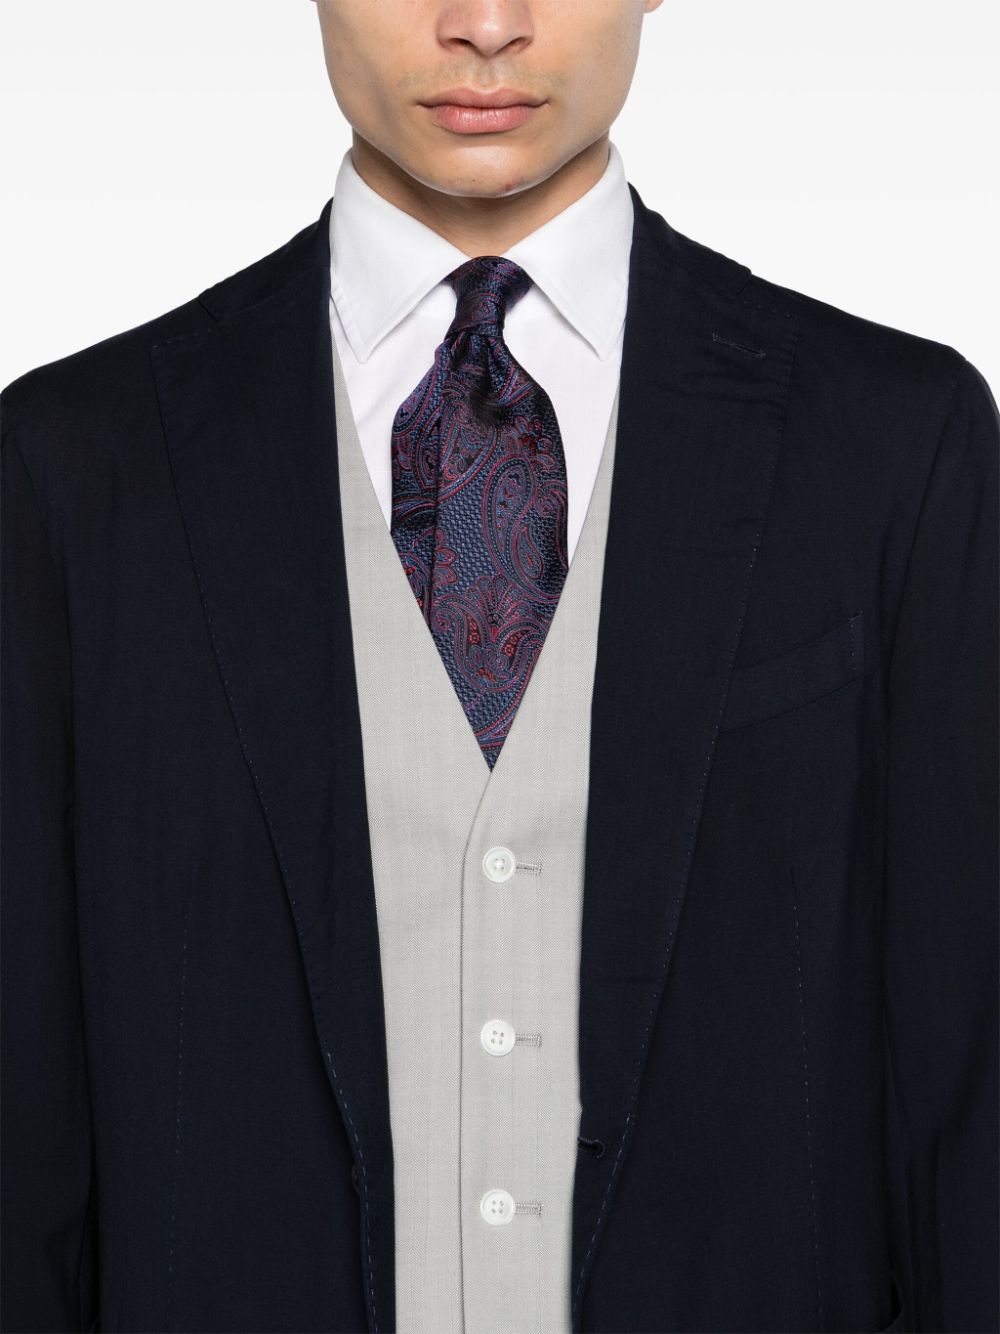 Blue single-breasted suit